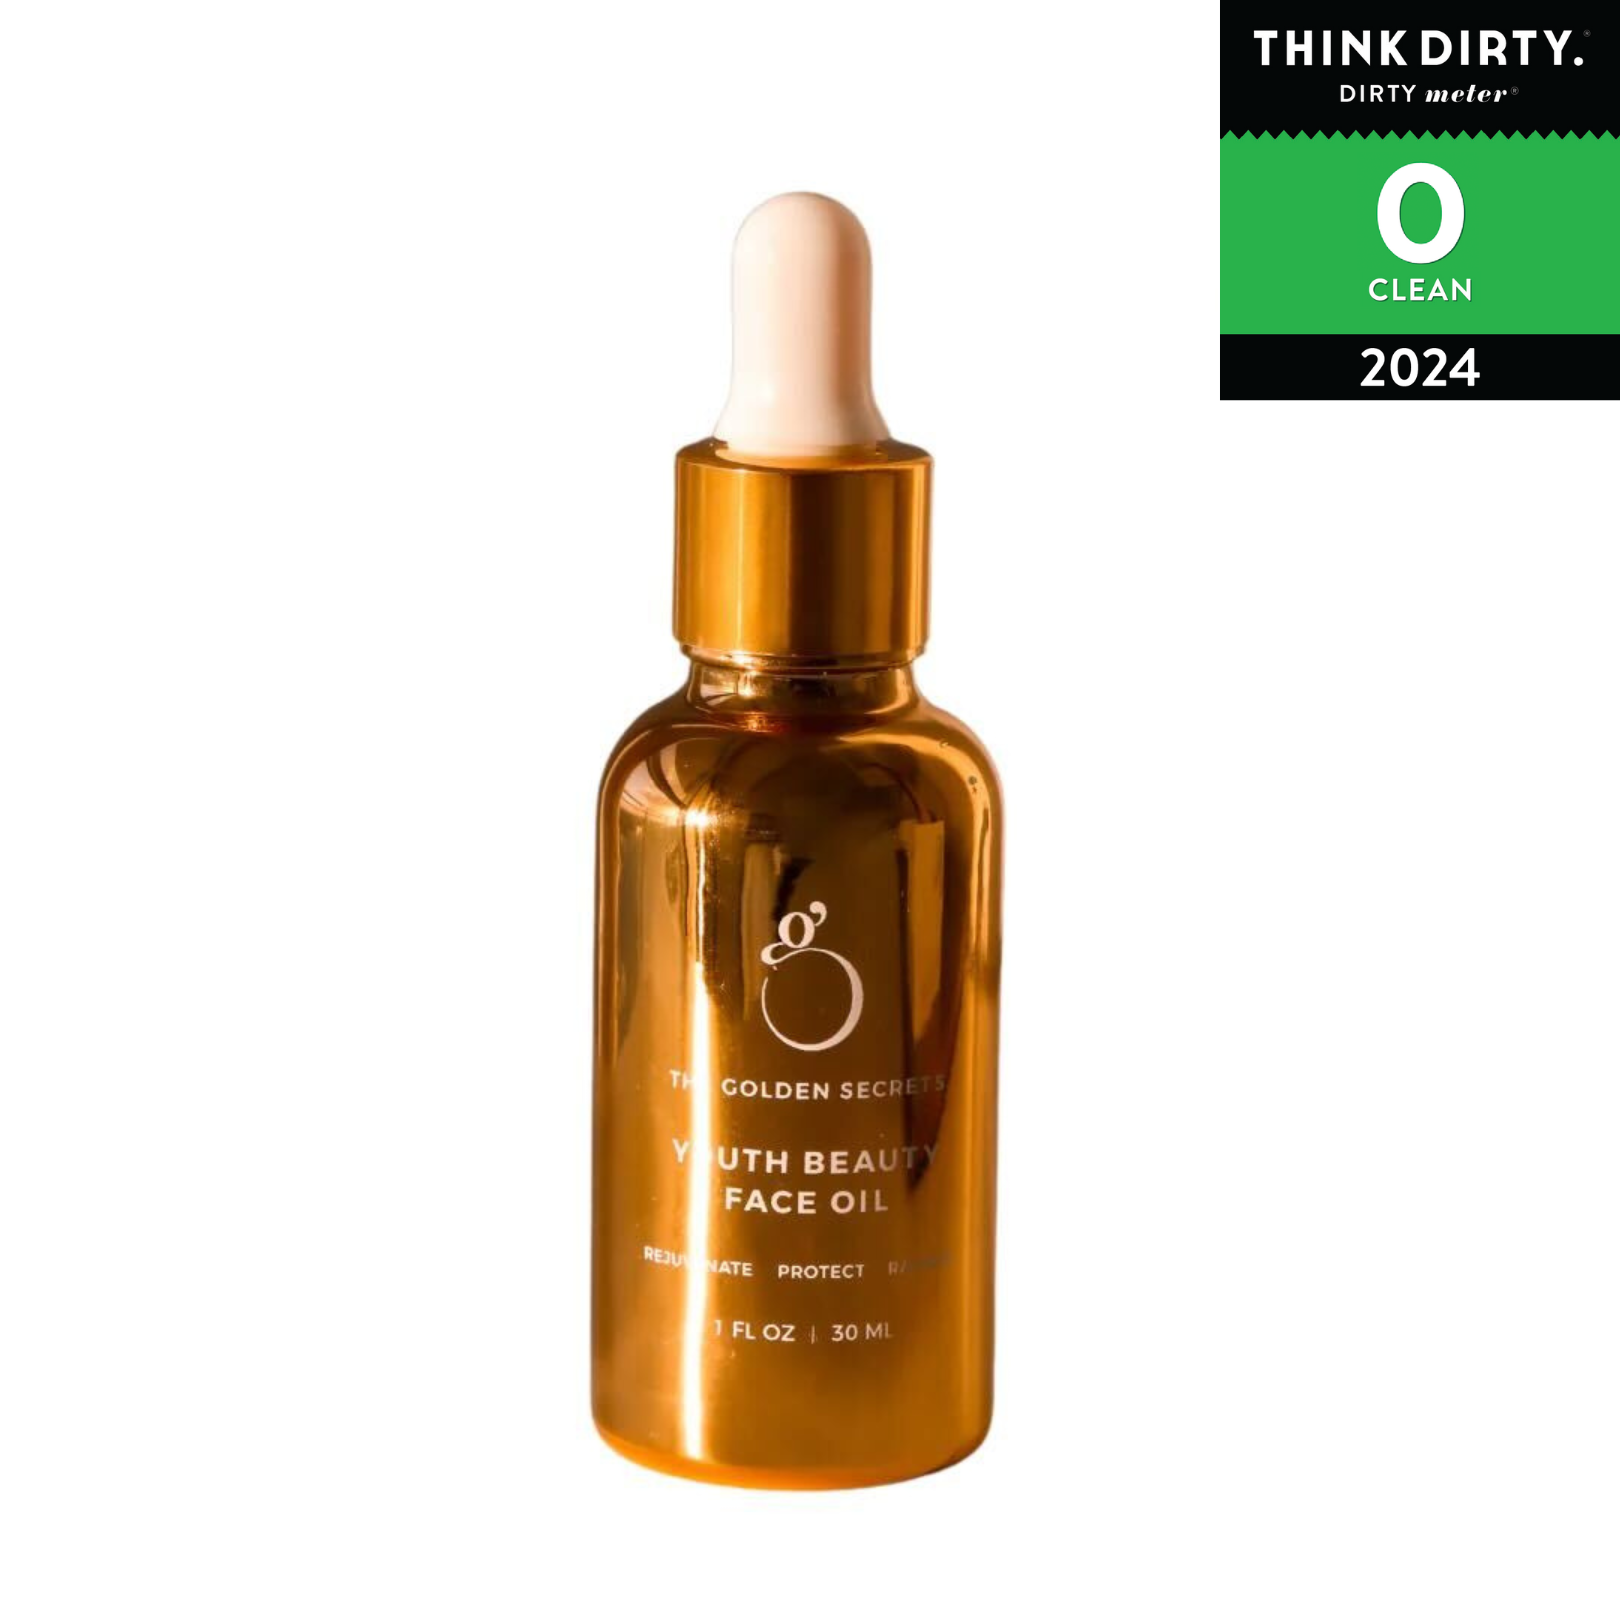 Youth Beauty Face Oil